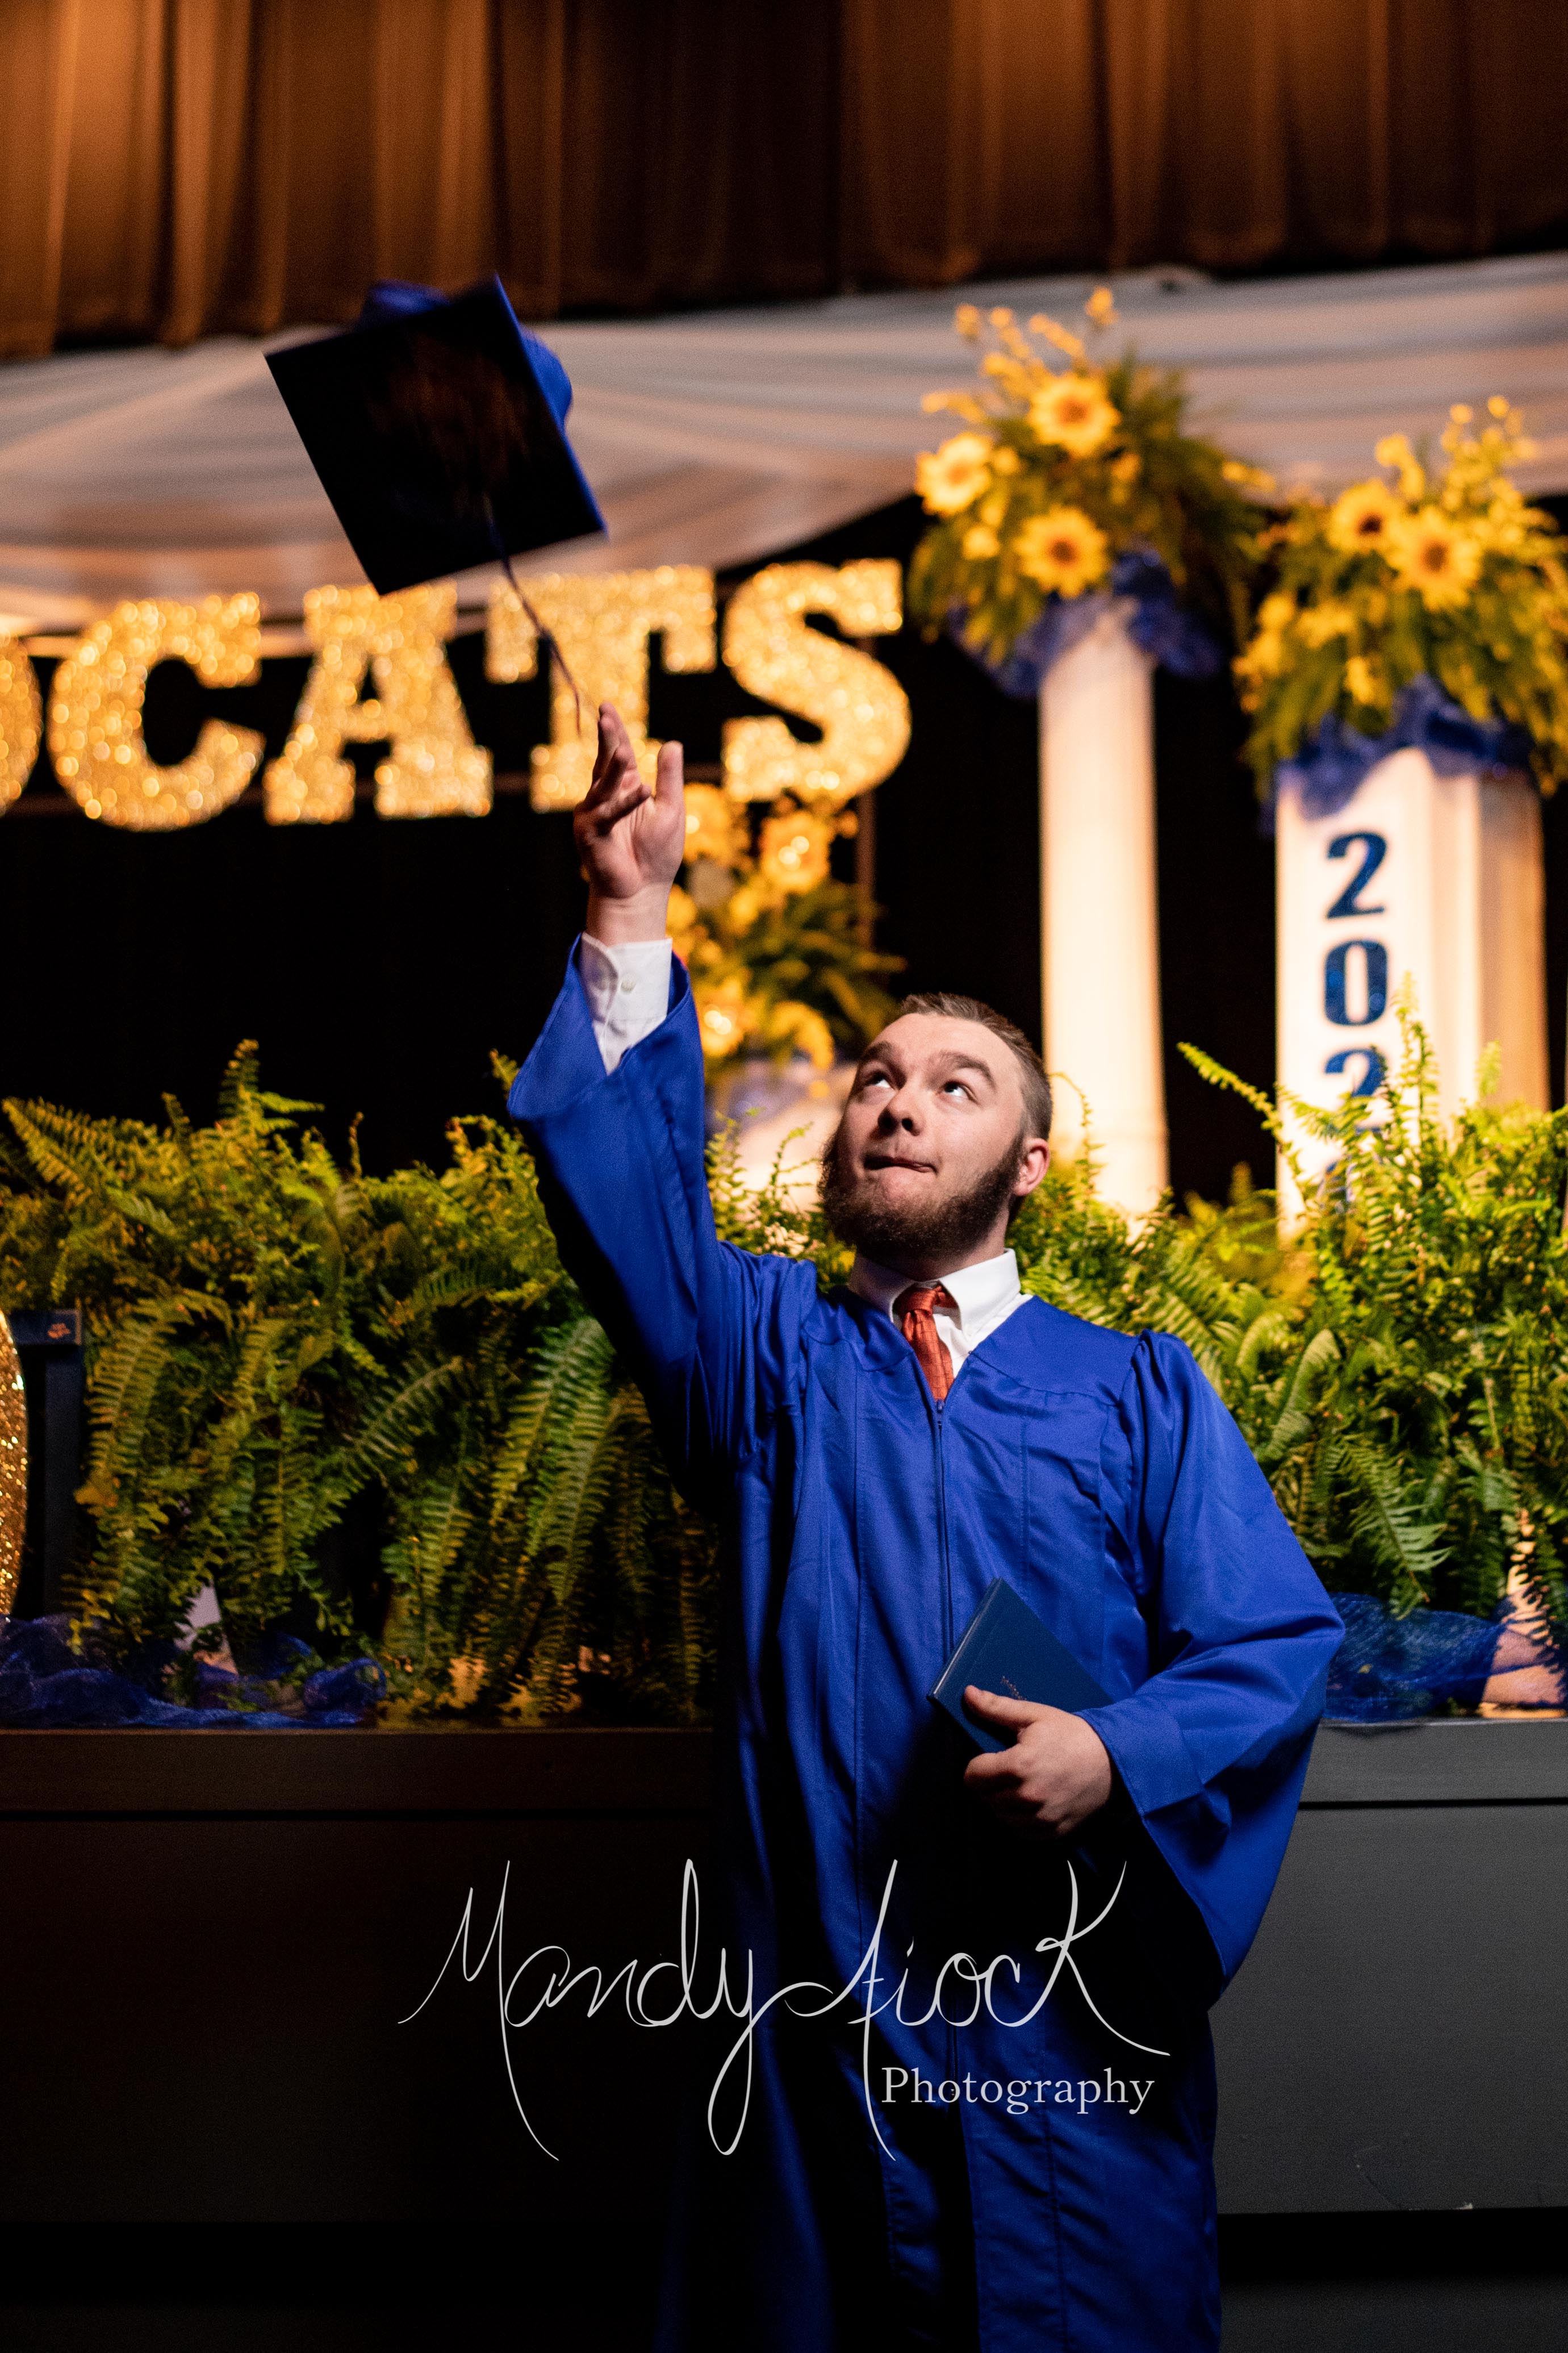 Photos from SSHS’ Virtual Graduation Cermony by Mandy Fiock Photography